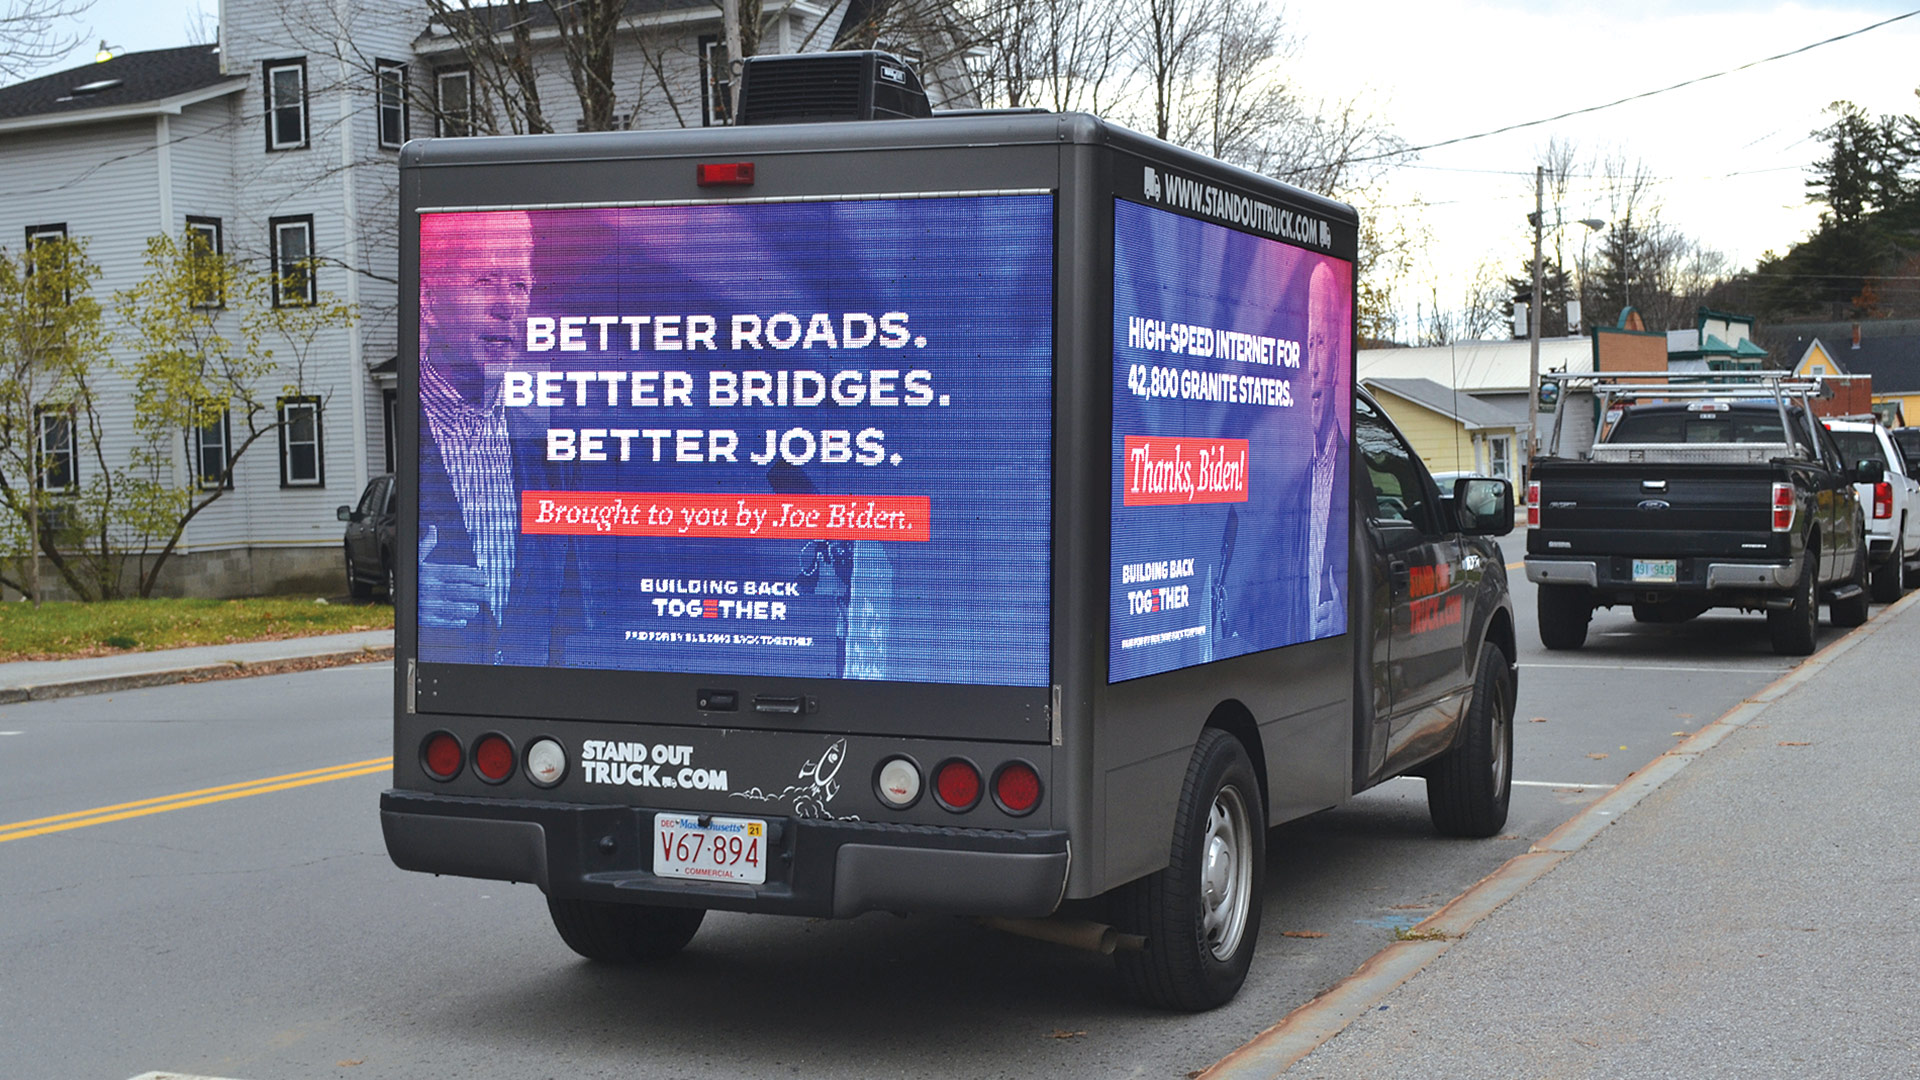 Stand Out Truck landed a high-profile assignment helping President Biden promote his Build Back Better plan.